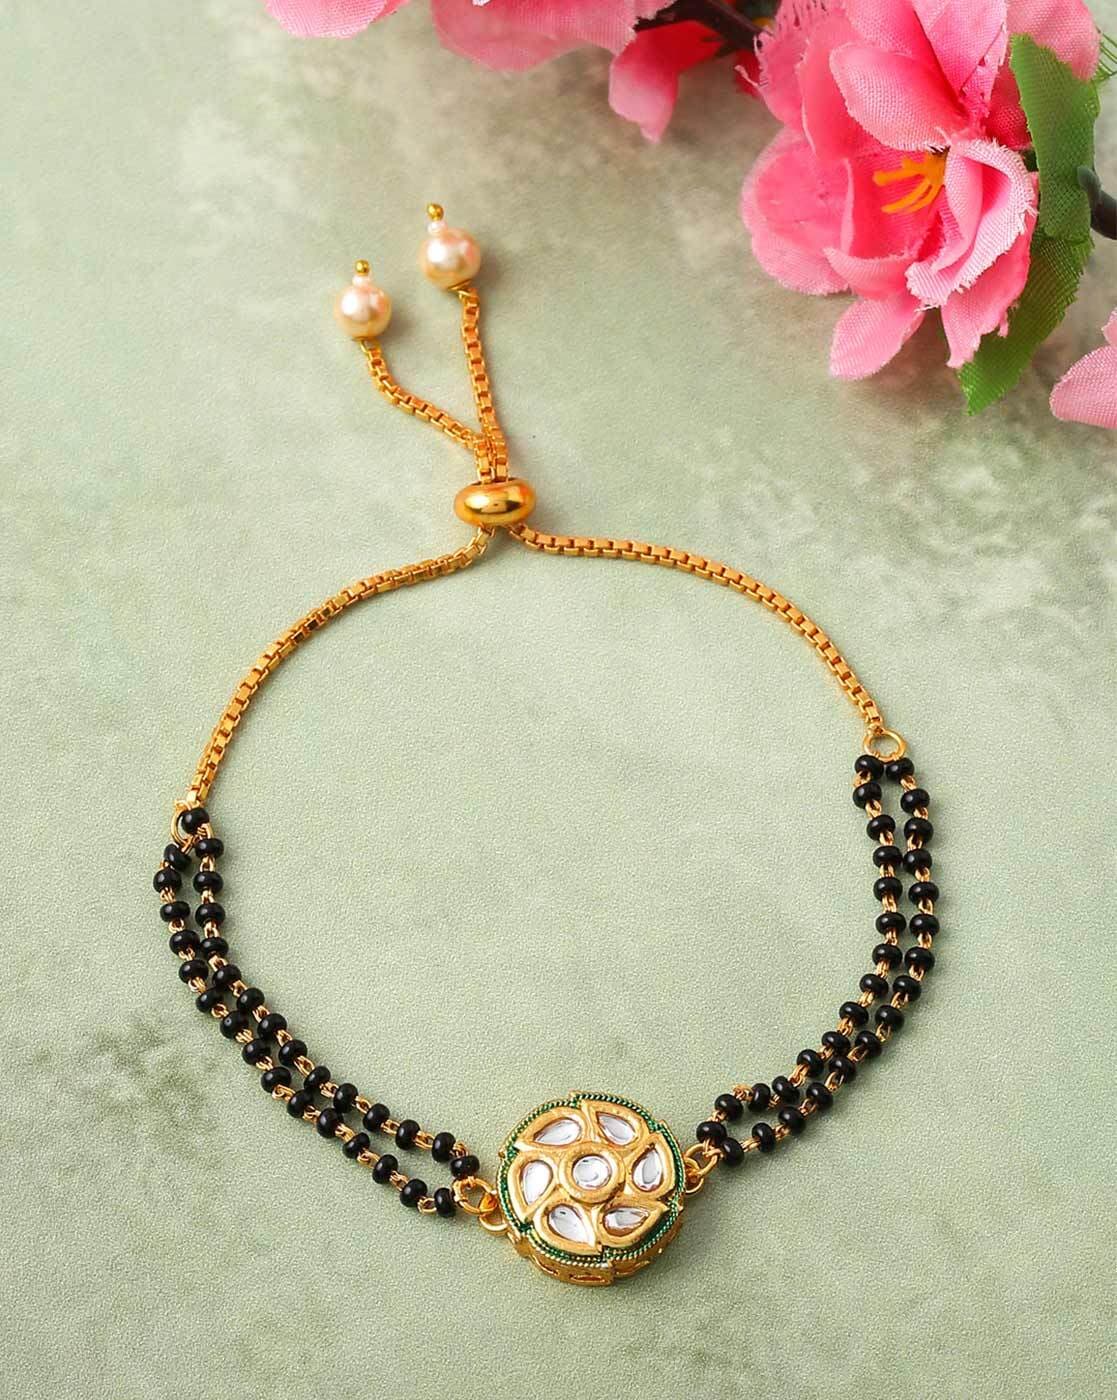 Indian Traditional Gold plated Brass Beads Hand Mangalsutra Bracelet for  Women | eBay